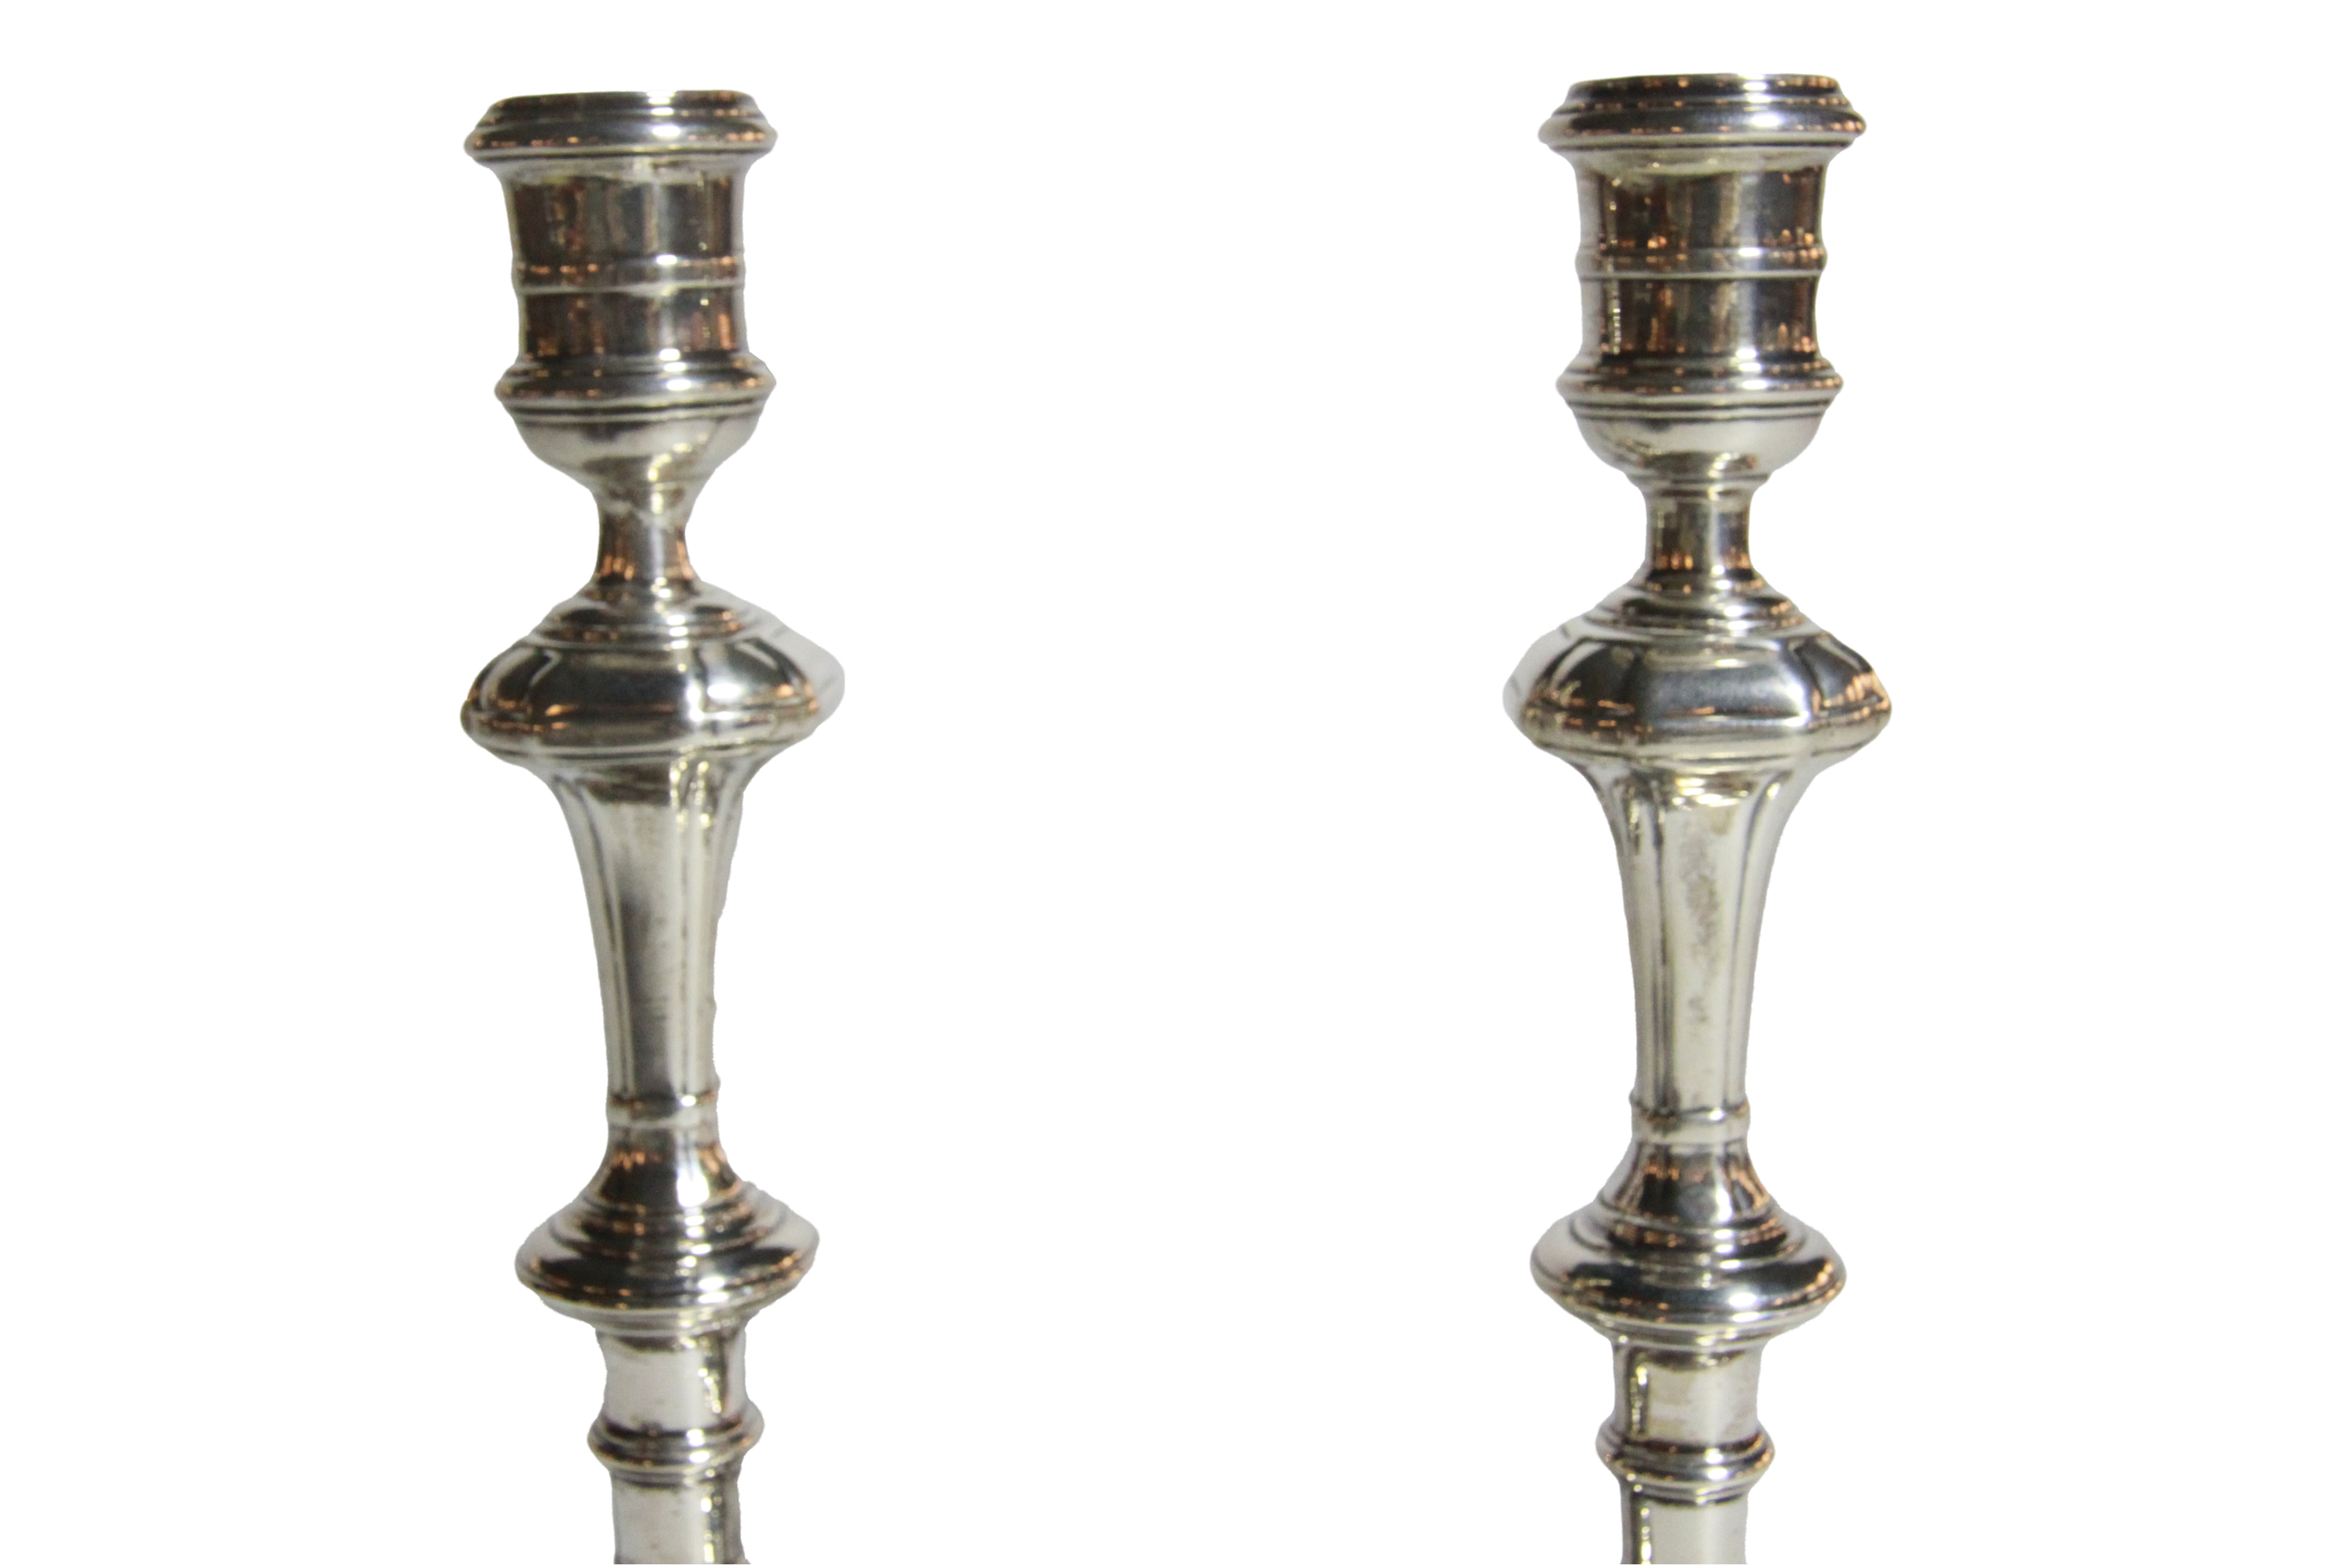 A fine & rare pair of 18th century Guernsey silver George II candlesticks, Henry Guillame - Image 3 of 6